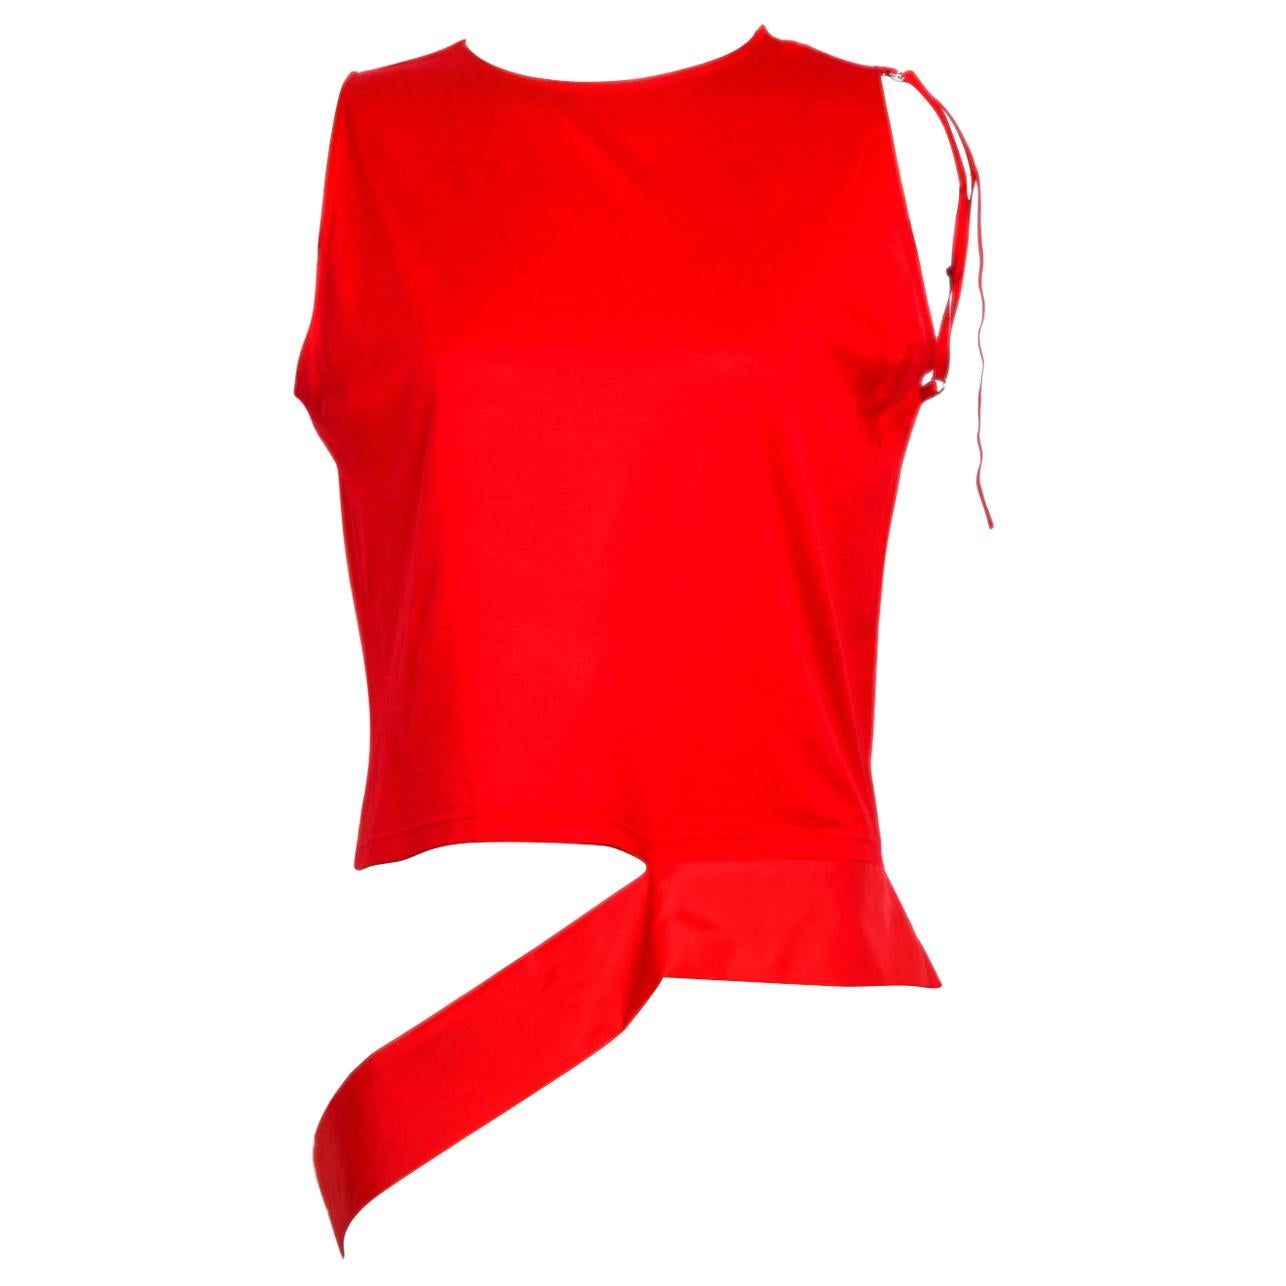 Helmut Lang spring summer 1997 runway red cotton top  For Sale